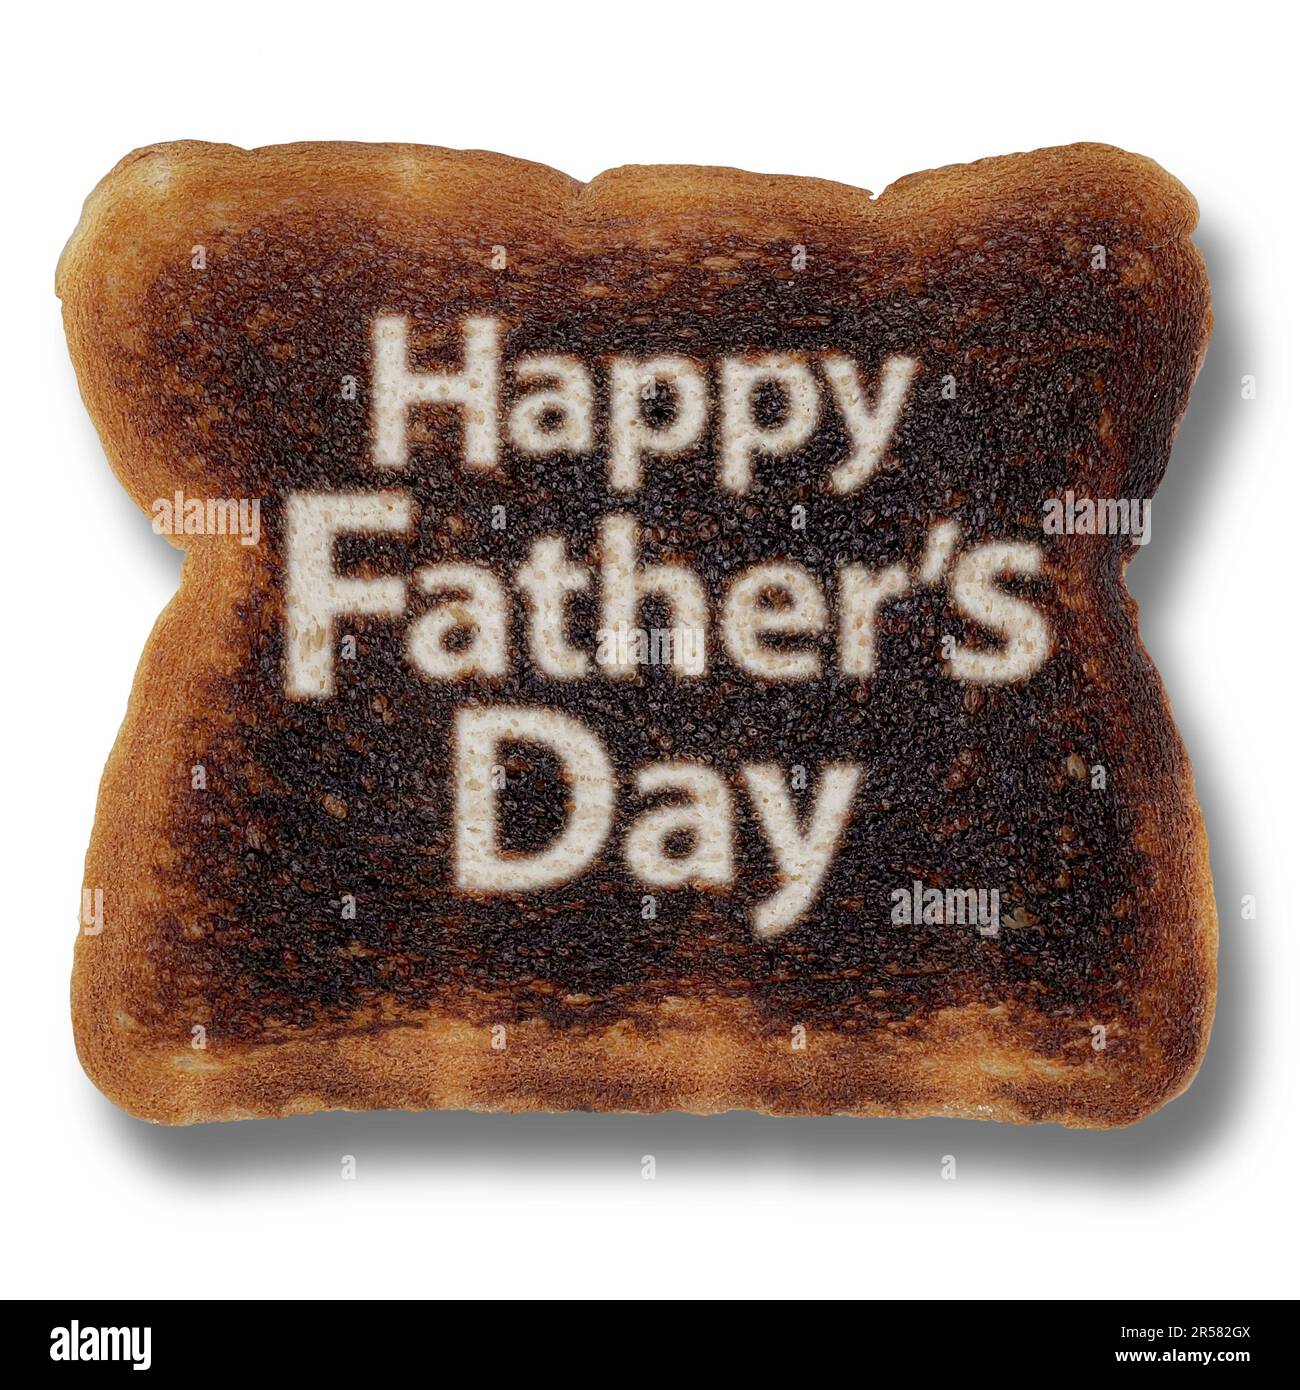 Fathers Day funny design symbol as a burnt toast with holiday celebration and paternal symbols for dad or daddy honoring papa as a cook for parenthood Stock Photo